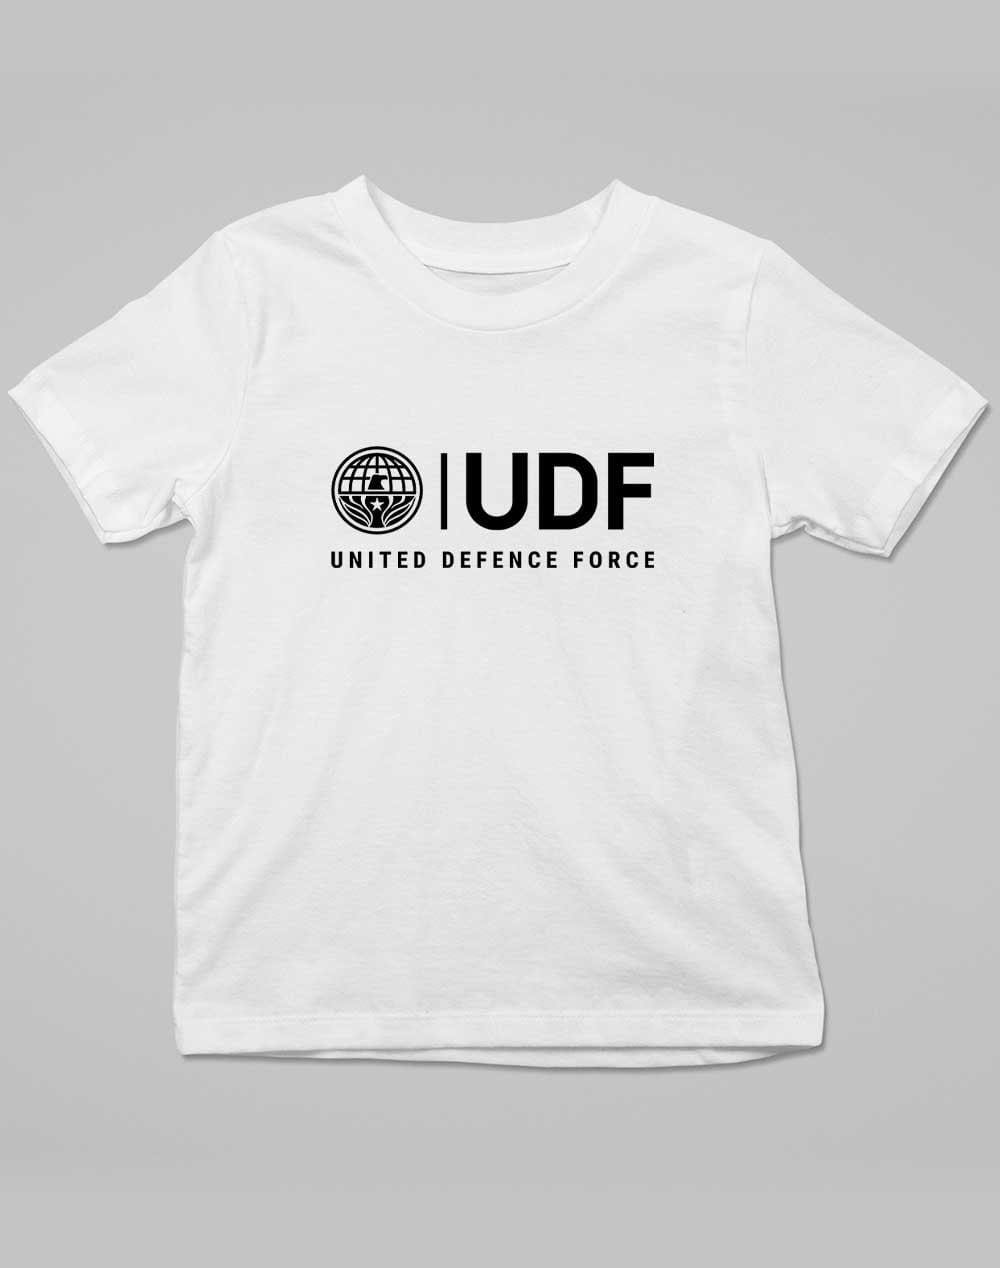 UDF United Defense Force Kids T-Shirt 3-4 years / White  - Off World Tees